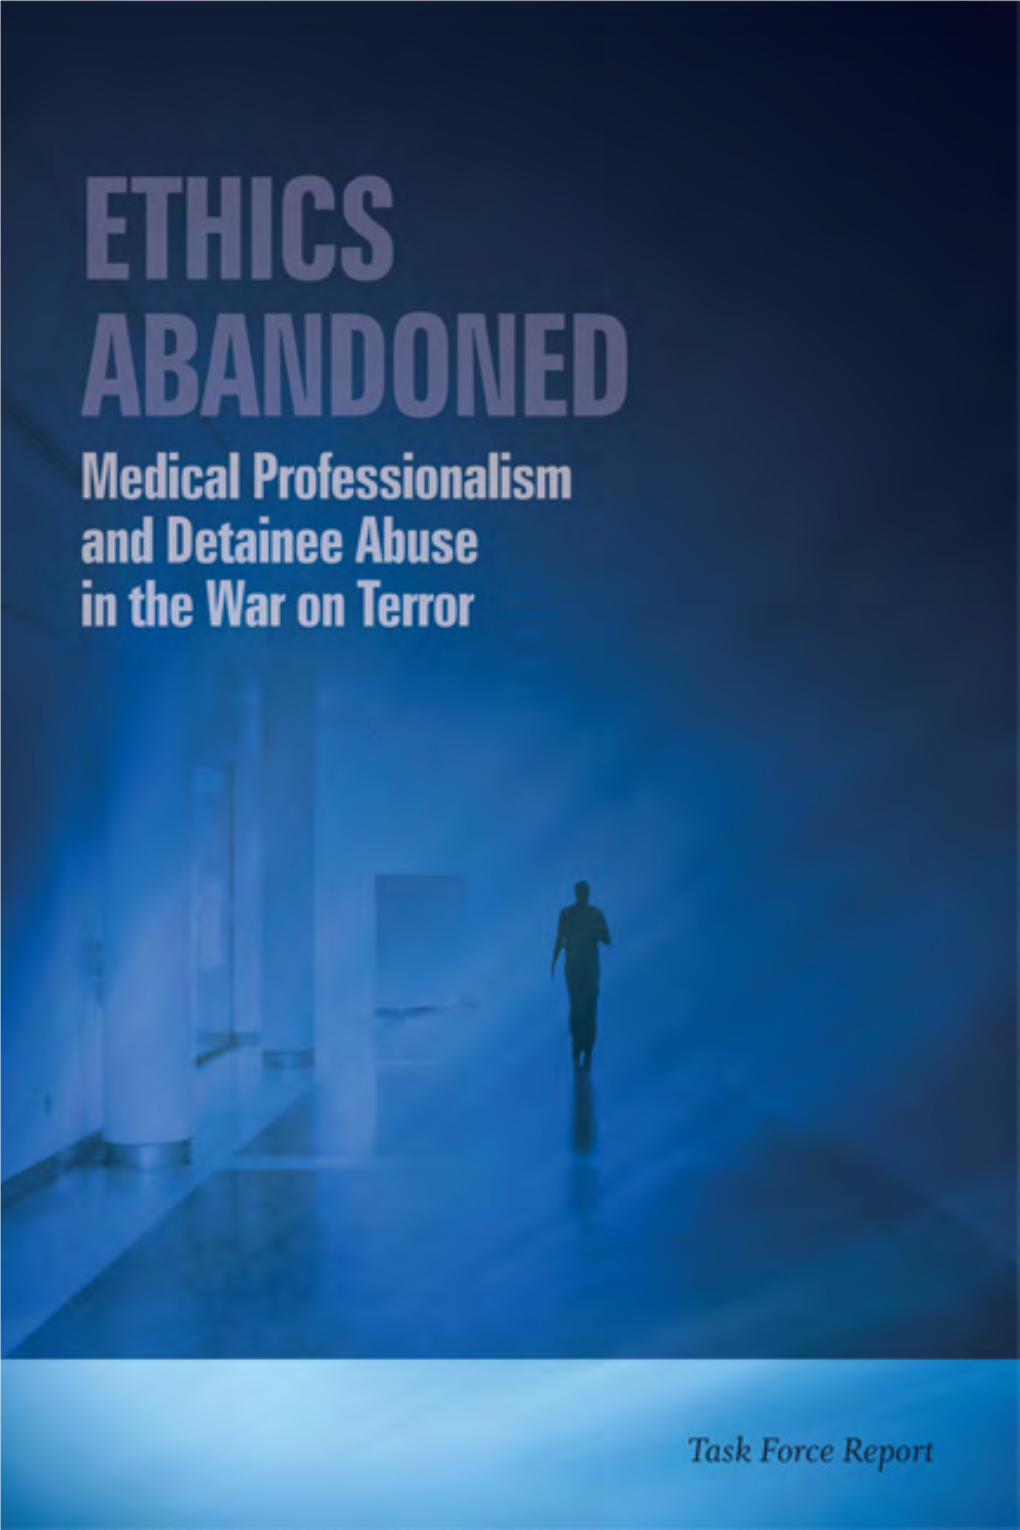 Ethics Abandoned: Medical Professionalism and Detainee Abuse in the “War on Terror”